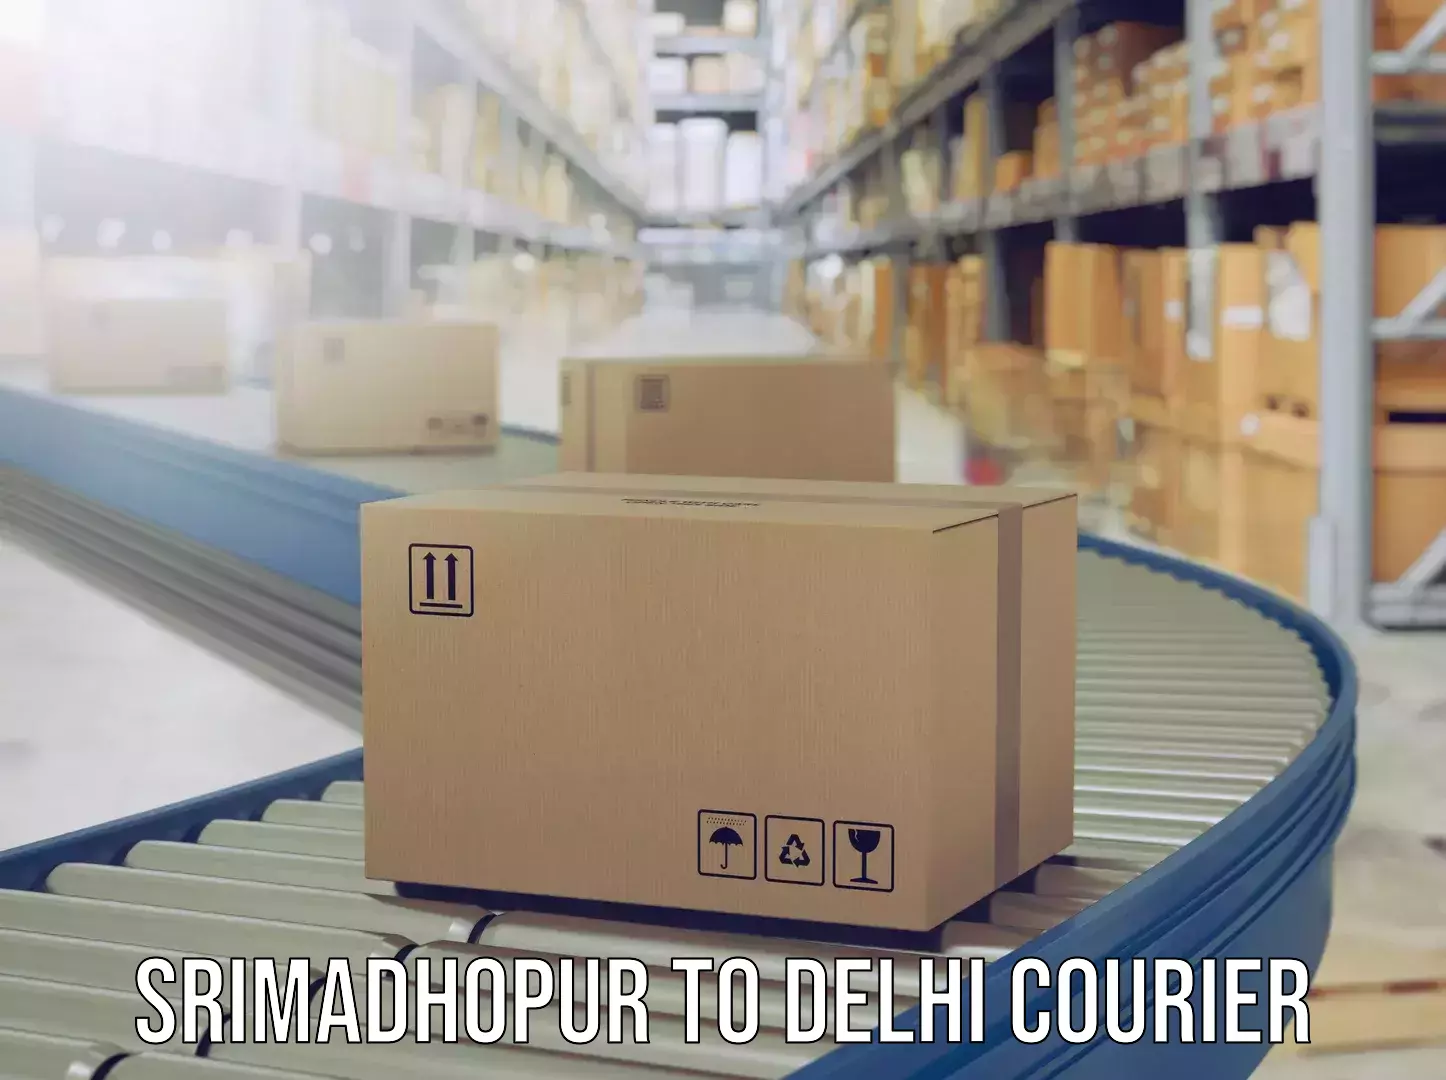 Express baggage shipping in Srimadhopur to Lodhi Road